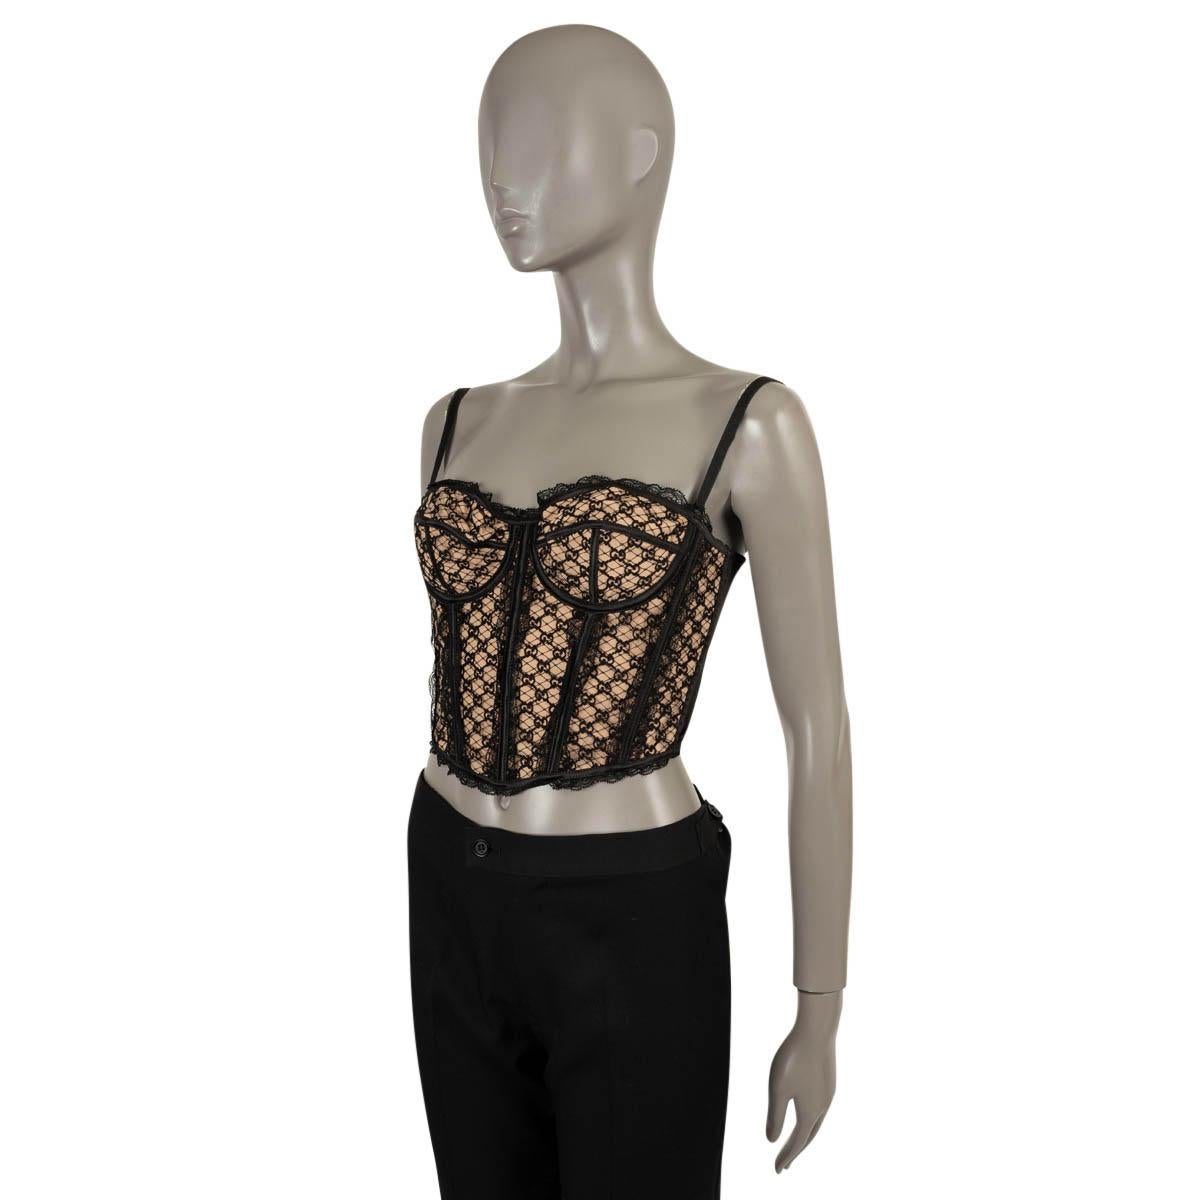 100% authentic Gucci corset bustier top in black GG net with nude lining (please note the content tag is missing). Features a lingerie silhouette, lace trims, adjustable straps and sweetheart neckline. Has been worn and is in excellent